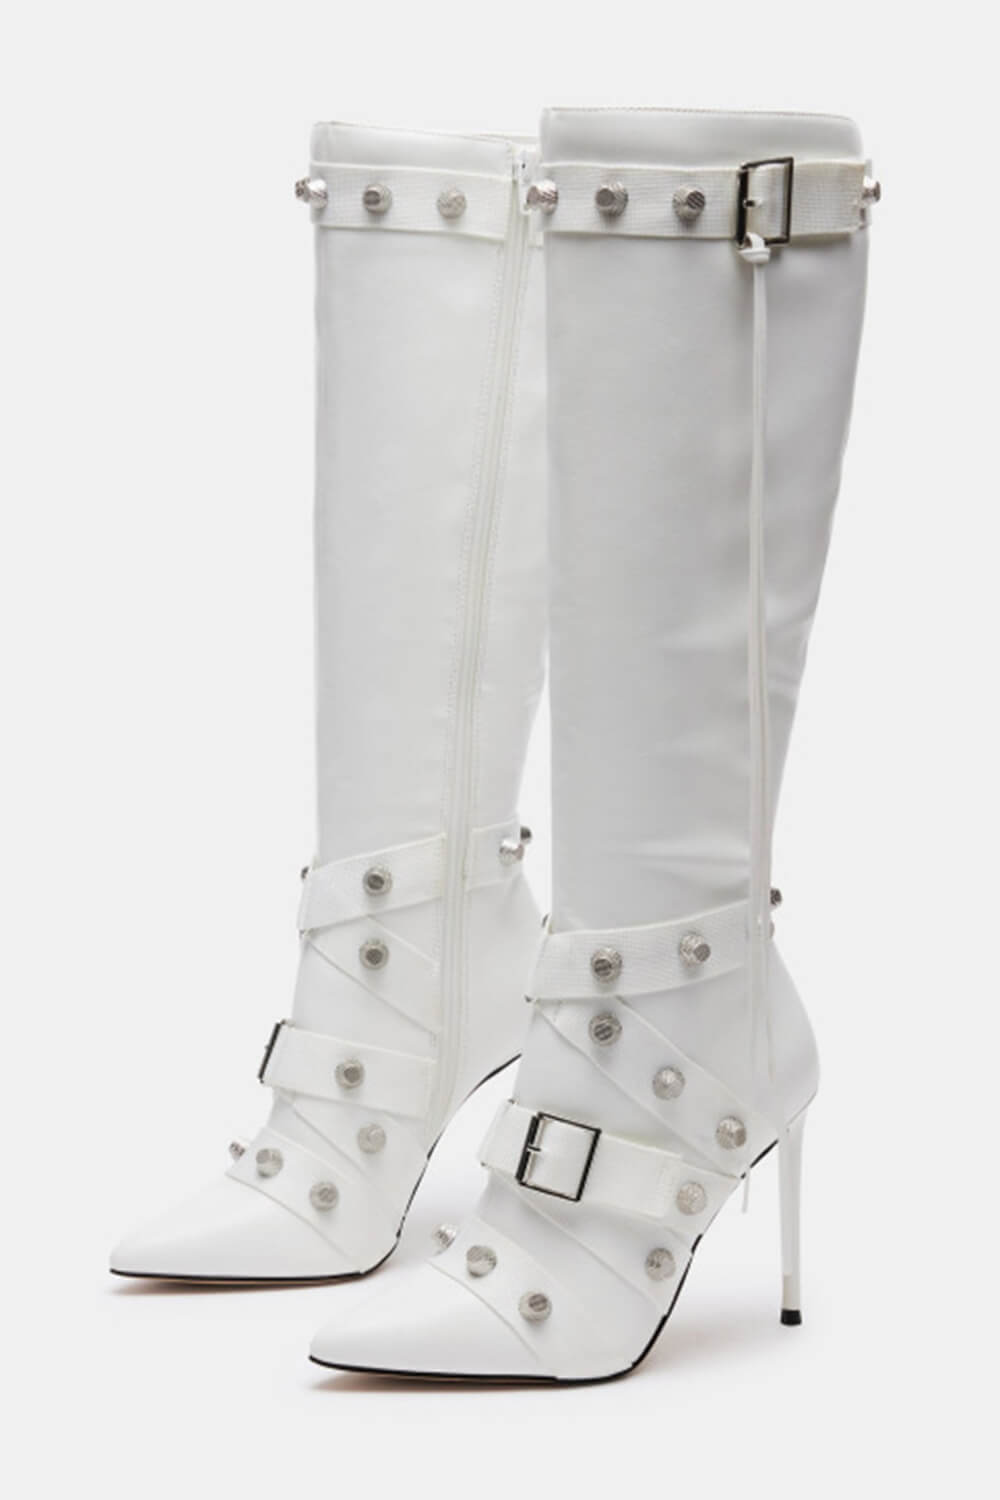 Pointed Toe Knee-High Stiletto Boots With Studs And Pin Buckle Strap Details - White